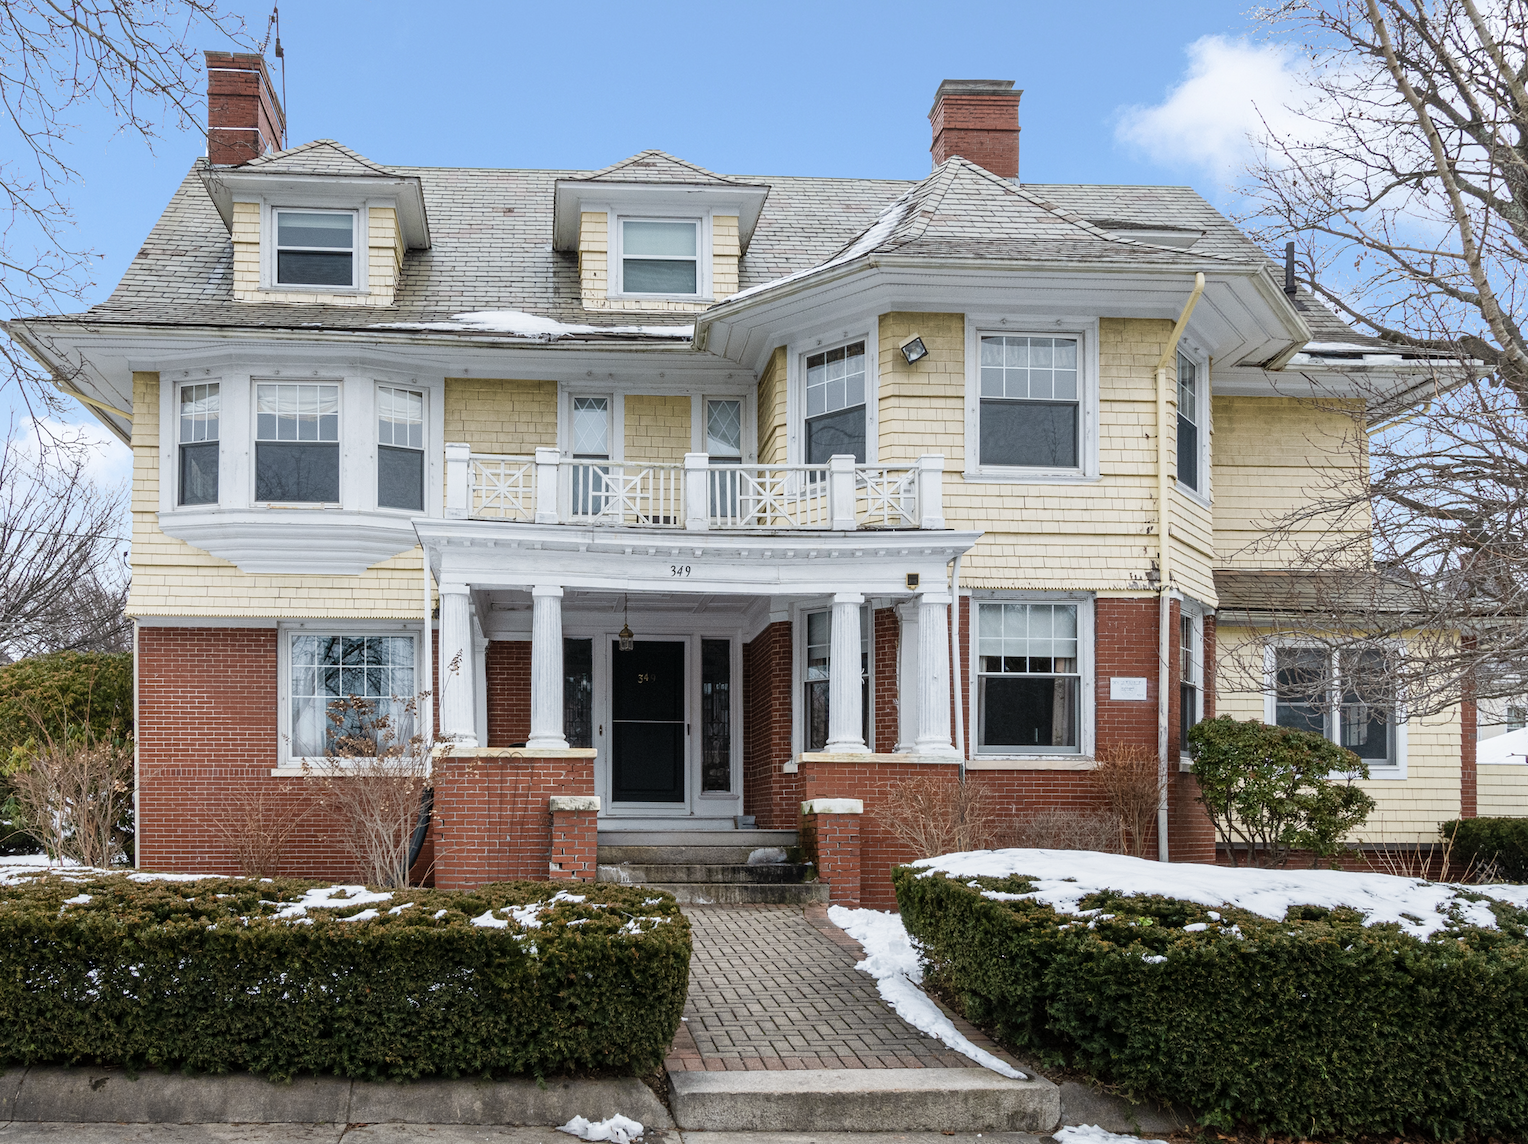 KIRA GREENE OF COMPASS SELLS HISTORIC WAYLAND SQUARE HOME FOR $1,387,500